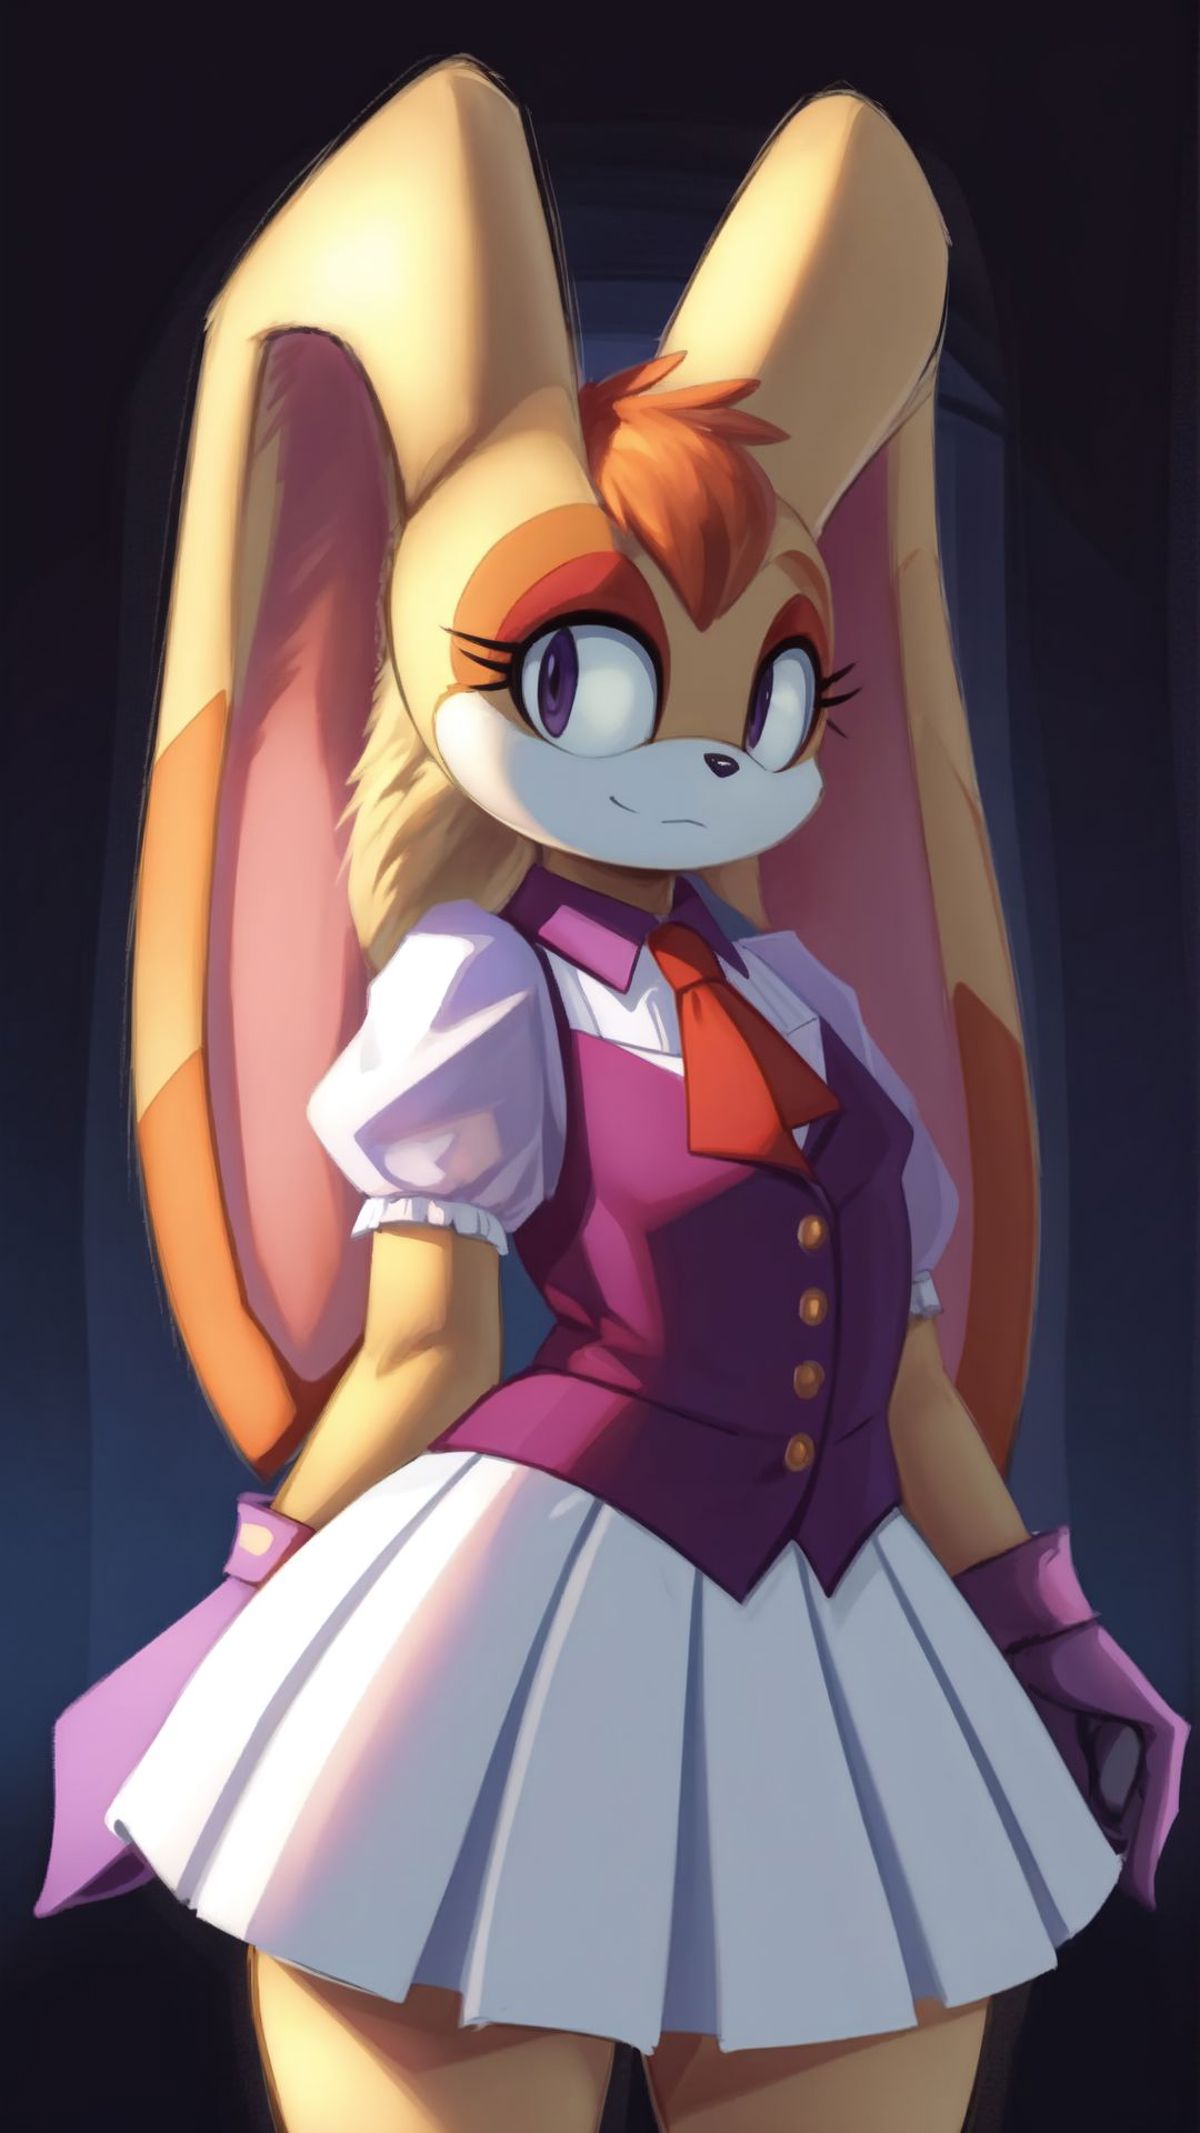 Vanilla the Rabbit (Character) image by marusame